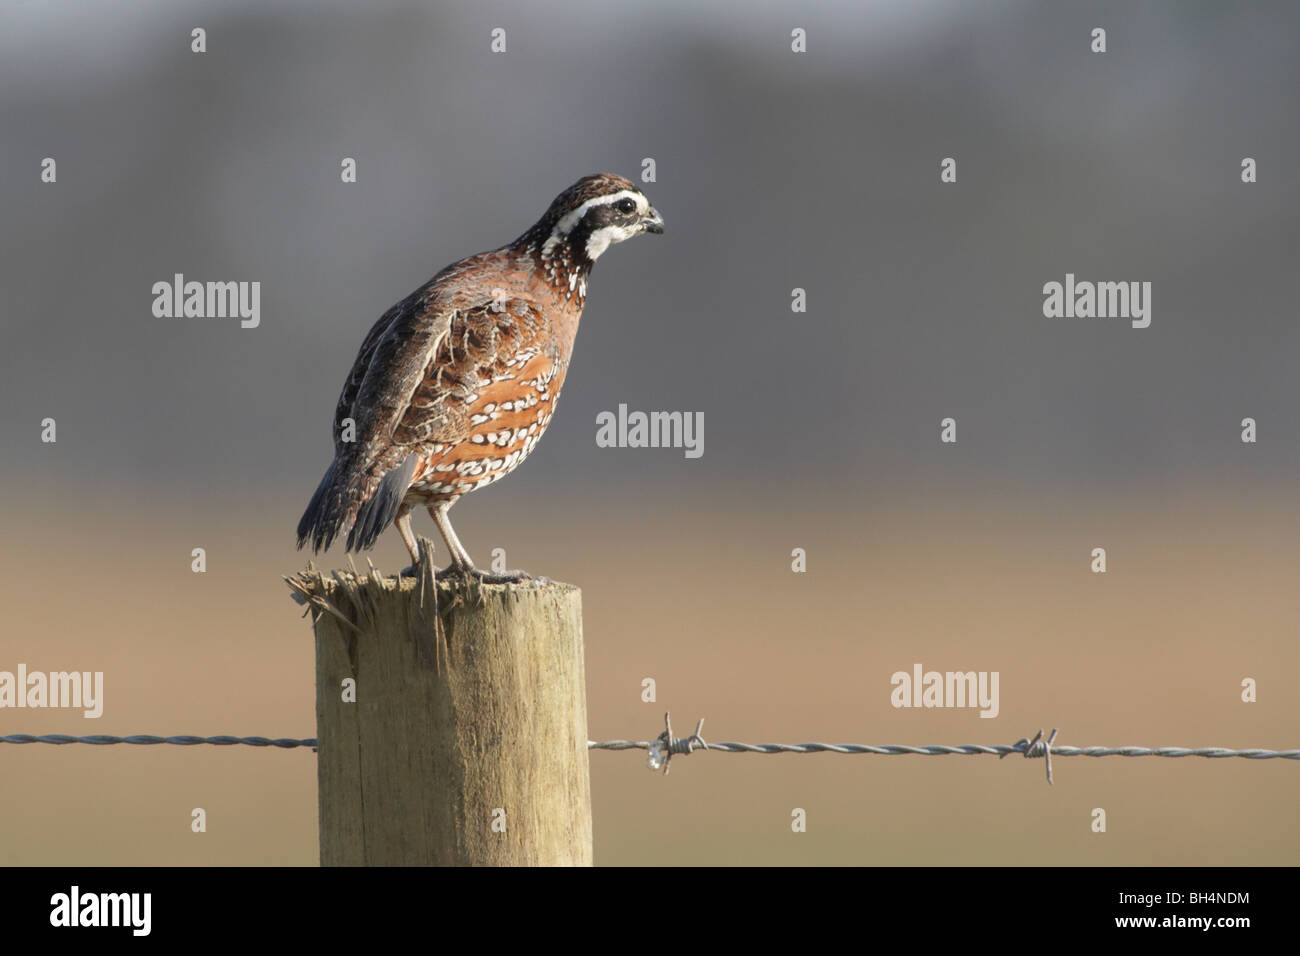 Northern bobwhite (Colinus virginianus) on fence post along a dirt track road in mid Florida. Stock Photo